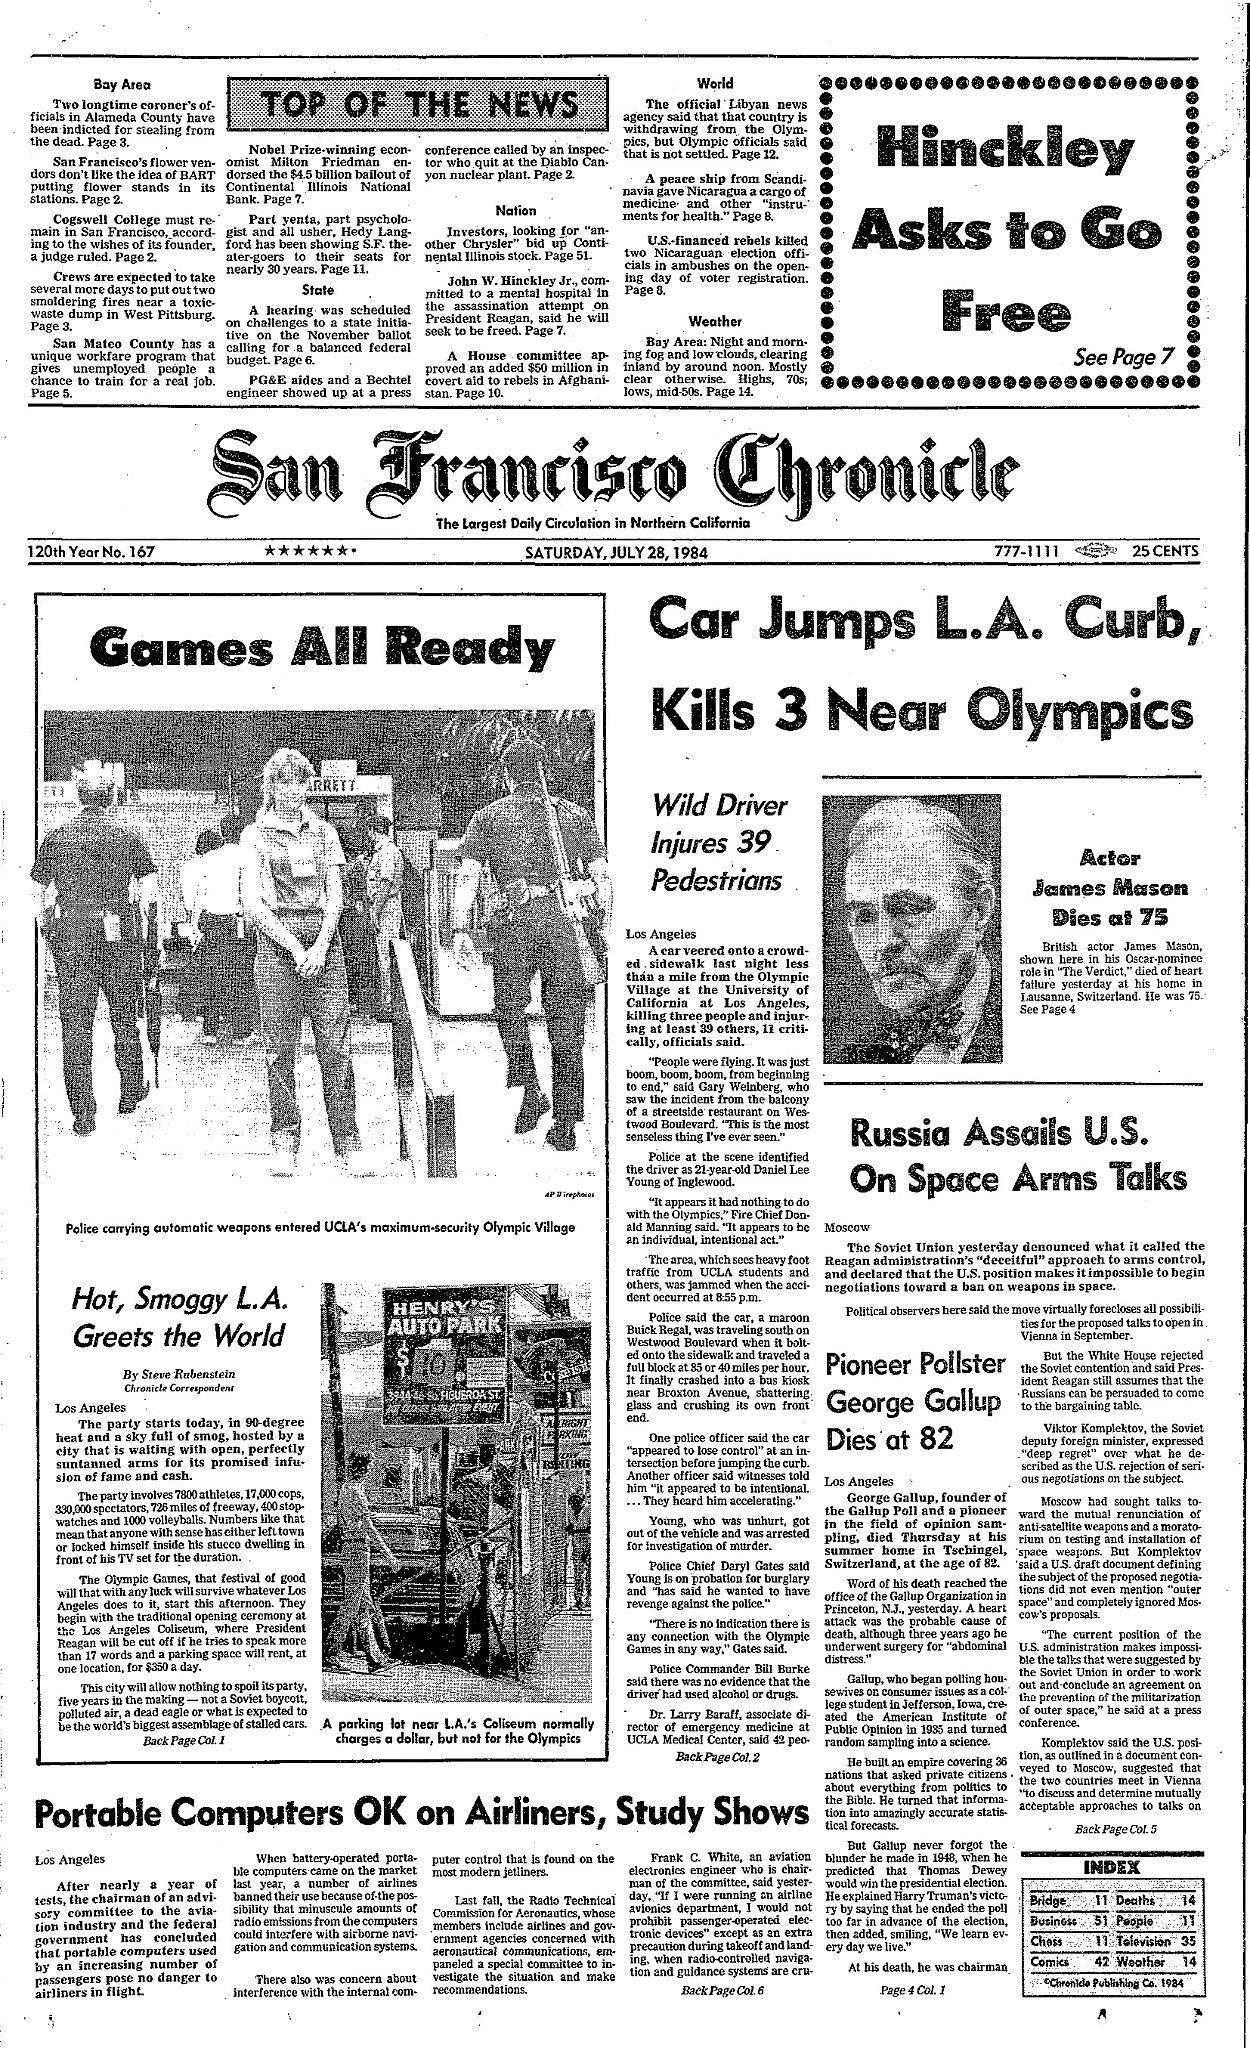 Chronicle Covers: Sun, sports, stars, smog at 1984 L.A. Olympics